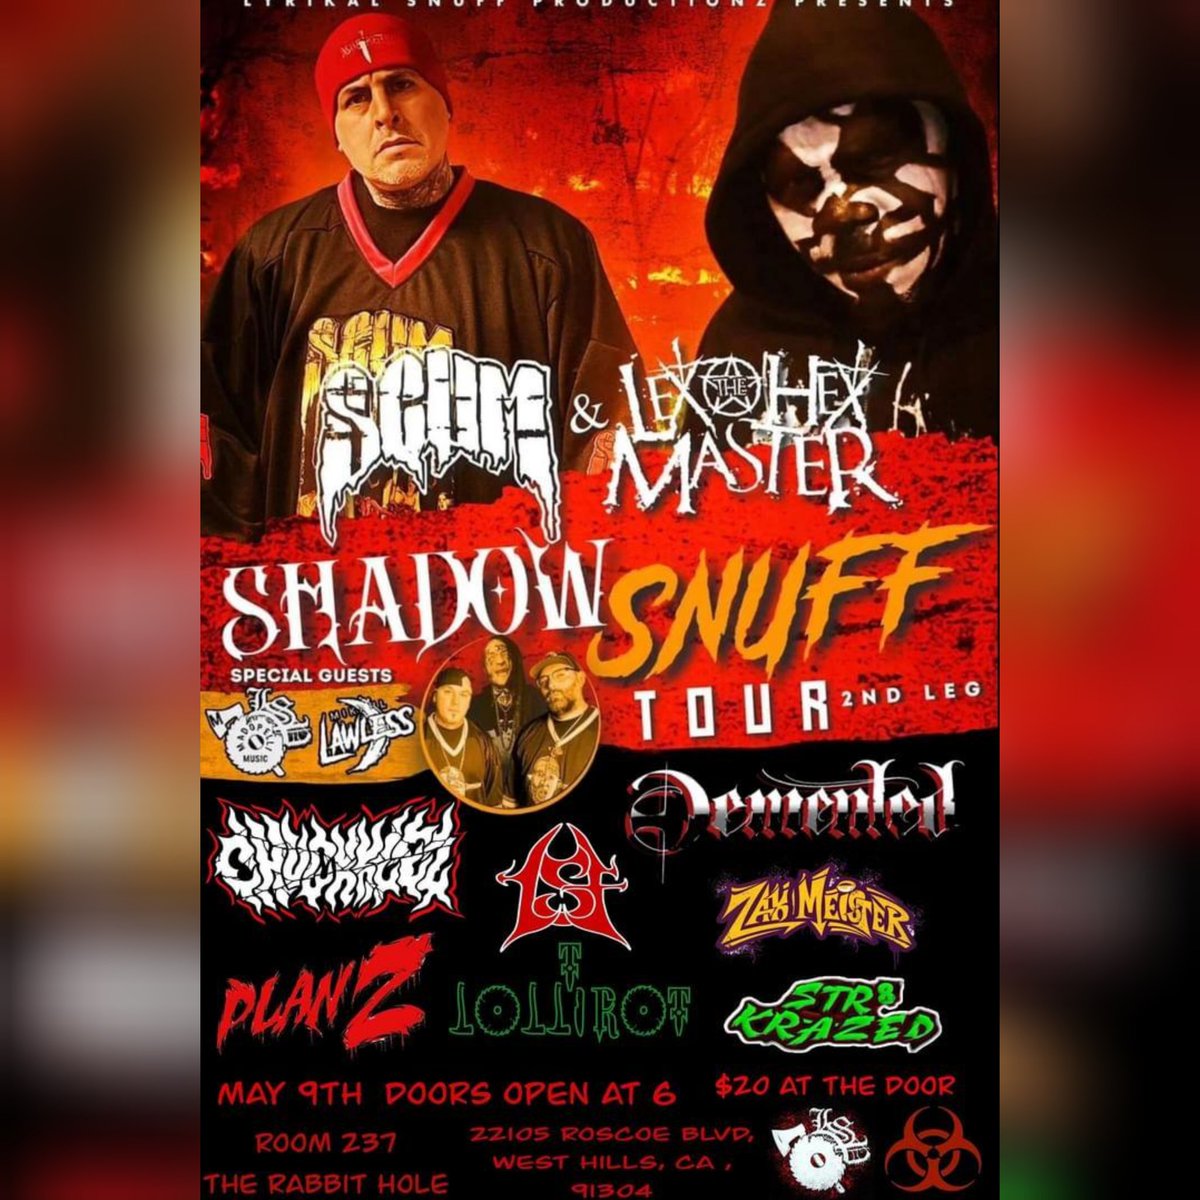 May 9th is about to go muthafuckin' down, y'all!!! The #ShadowSnuffTour with @SCUM412, @lexthehexmaster, Madopelli & Mikahl Lawless will be coming to West Hills, CA at 'The Rabbit Hole.' Catch the family and myself there to perform that sickness and get your tickets TODAY!!! 😈👆🏾